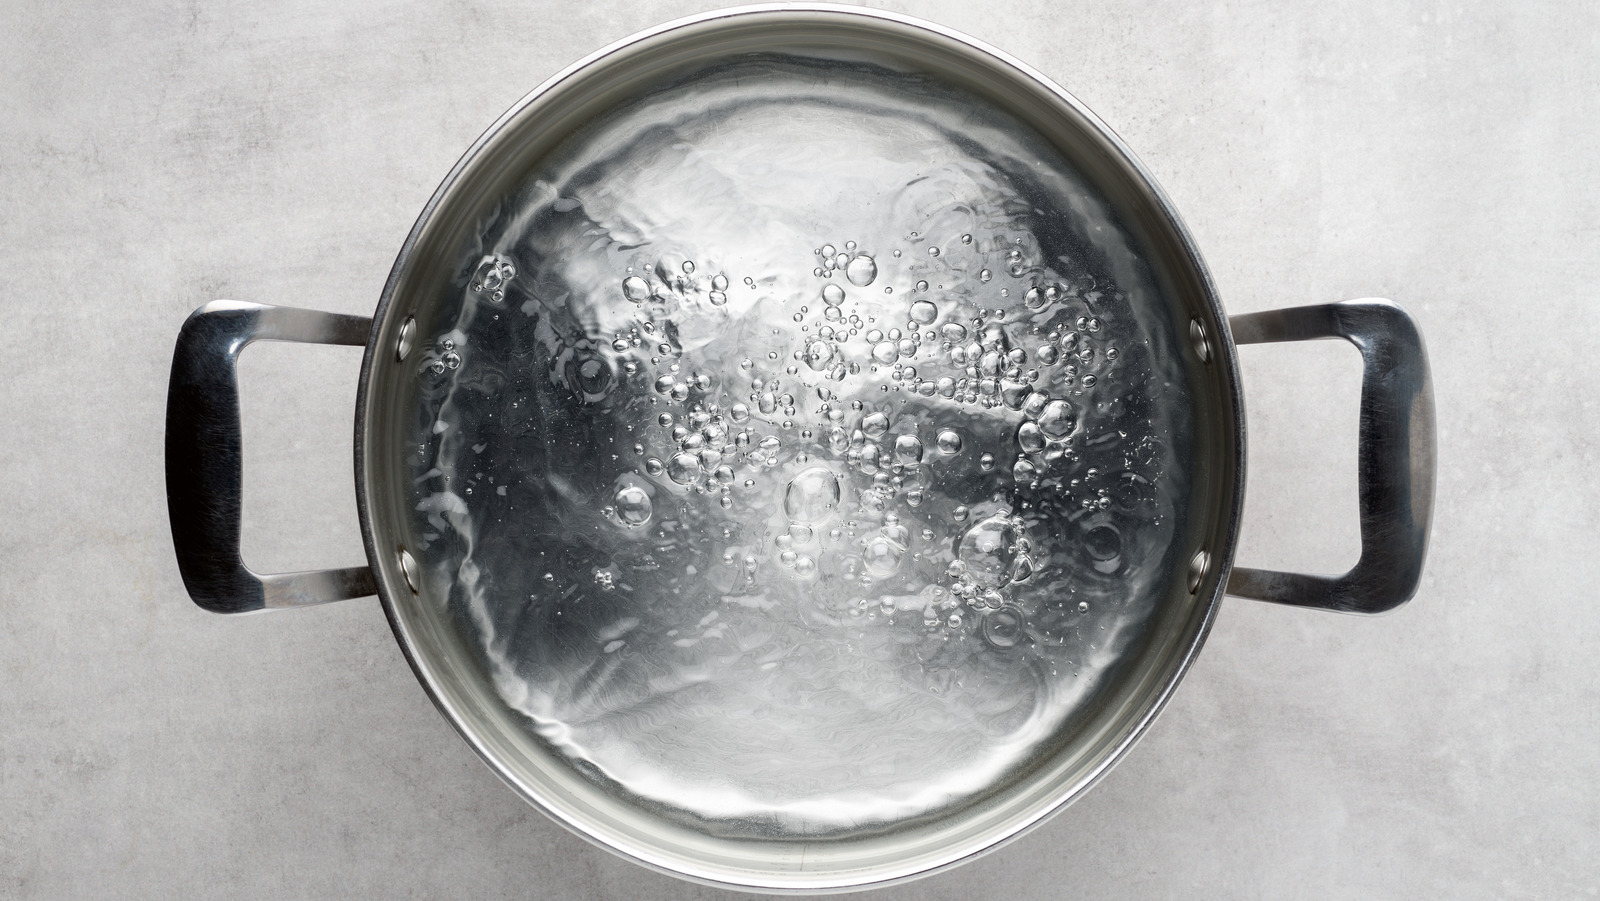 https://www.tastingtable.com/img/gallery/12-unexpected-tips-you-need-when-boiling-water/l-intro-1674852680.jpg